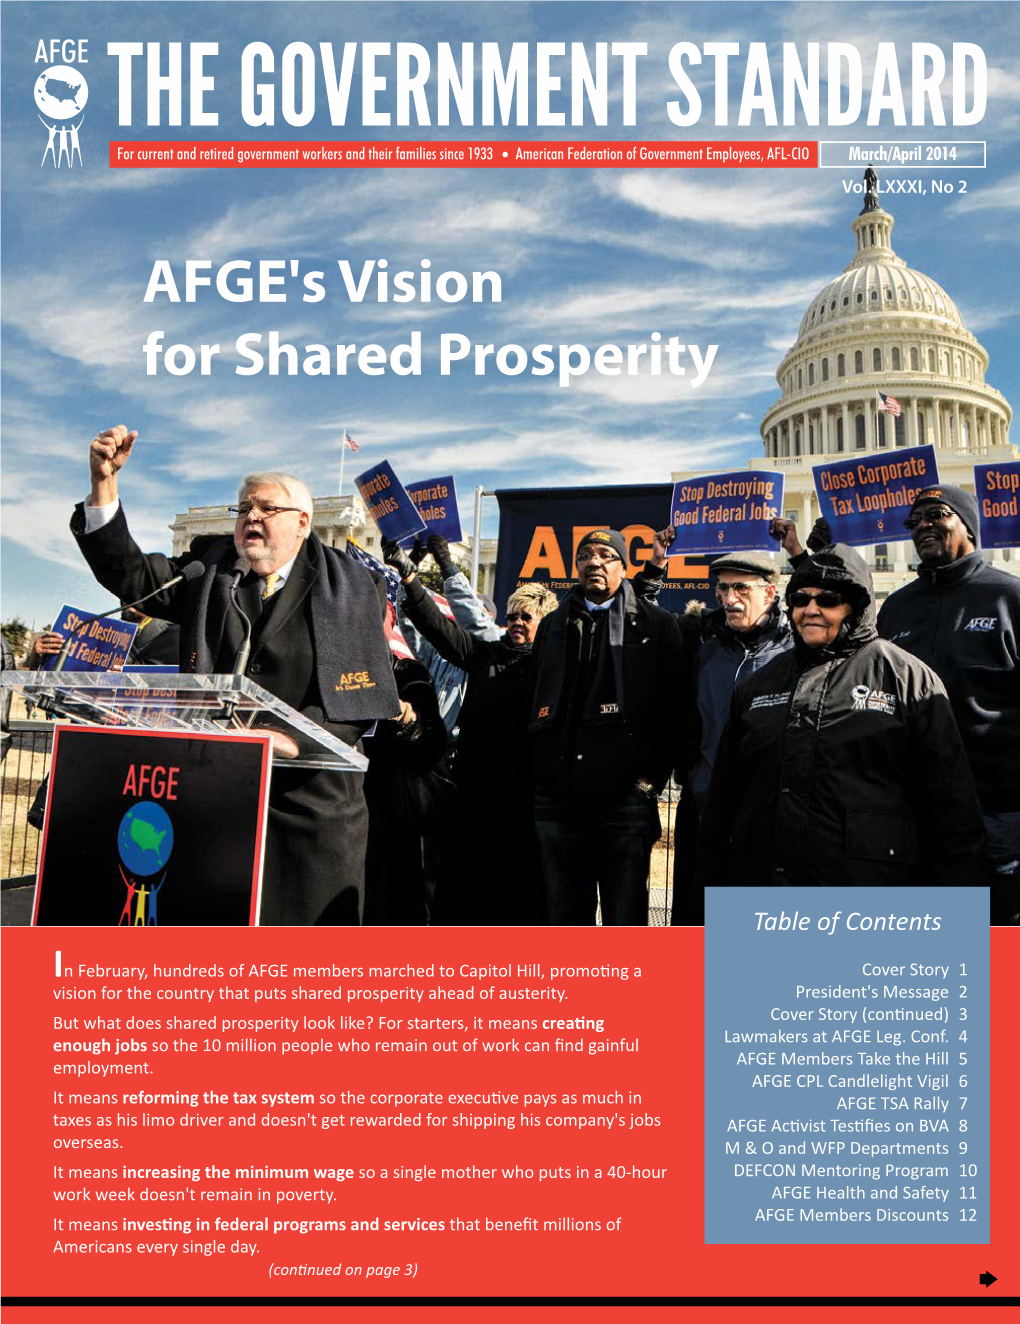 AFGE's Vision for Shared Prosperity